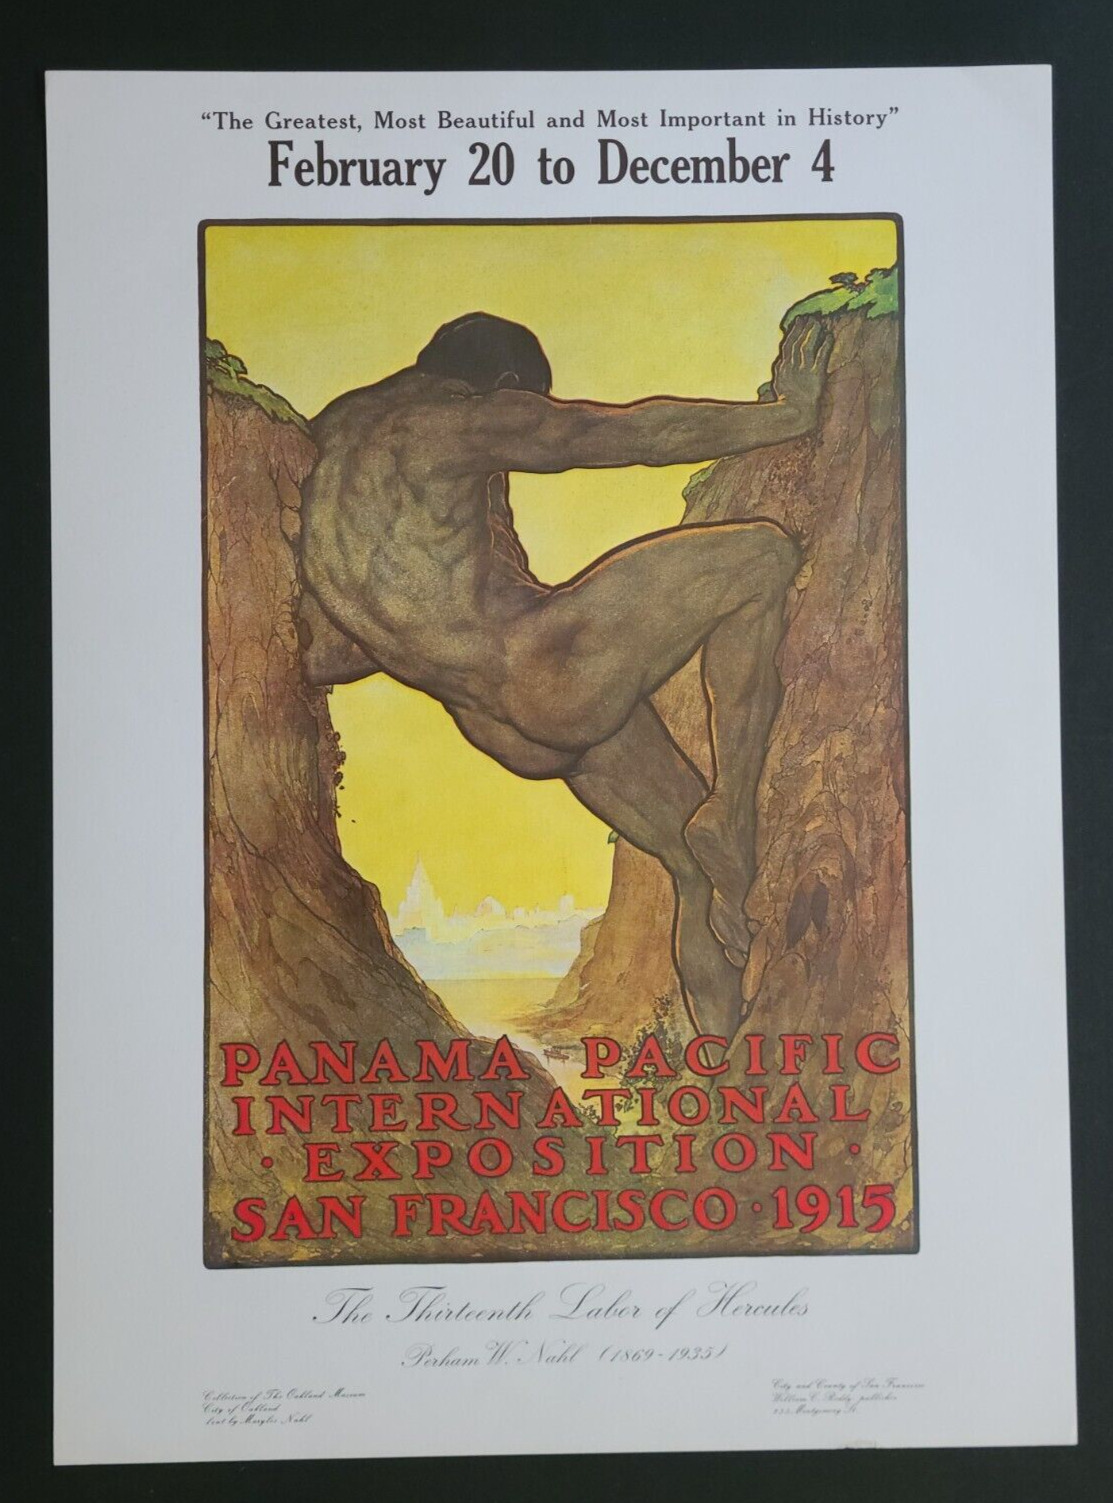 VTG Poster Panama Pacific International Exposition SF 1915 by the Oakland Museum